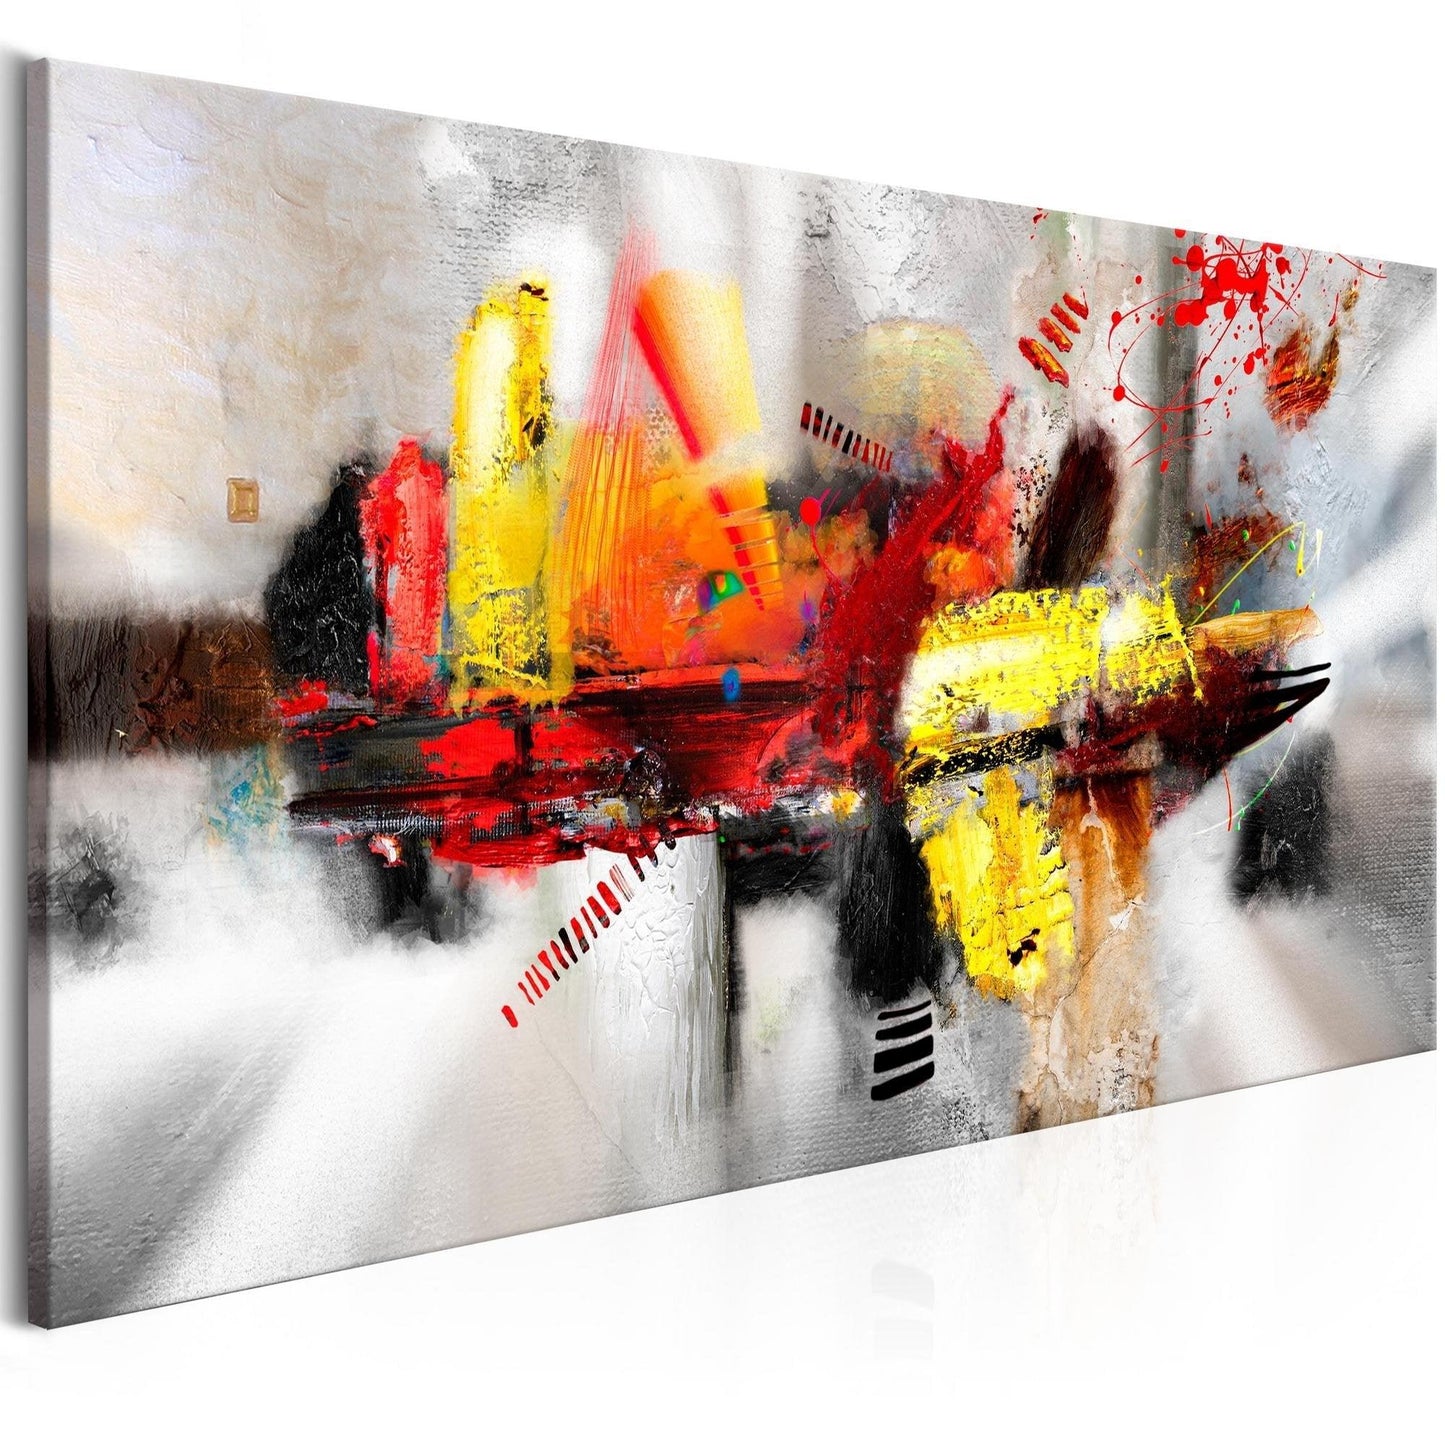 Canvas Print - Hit and Sunk - www.trendingbestsellers.com